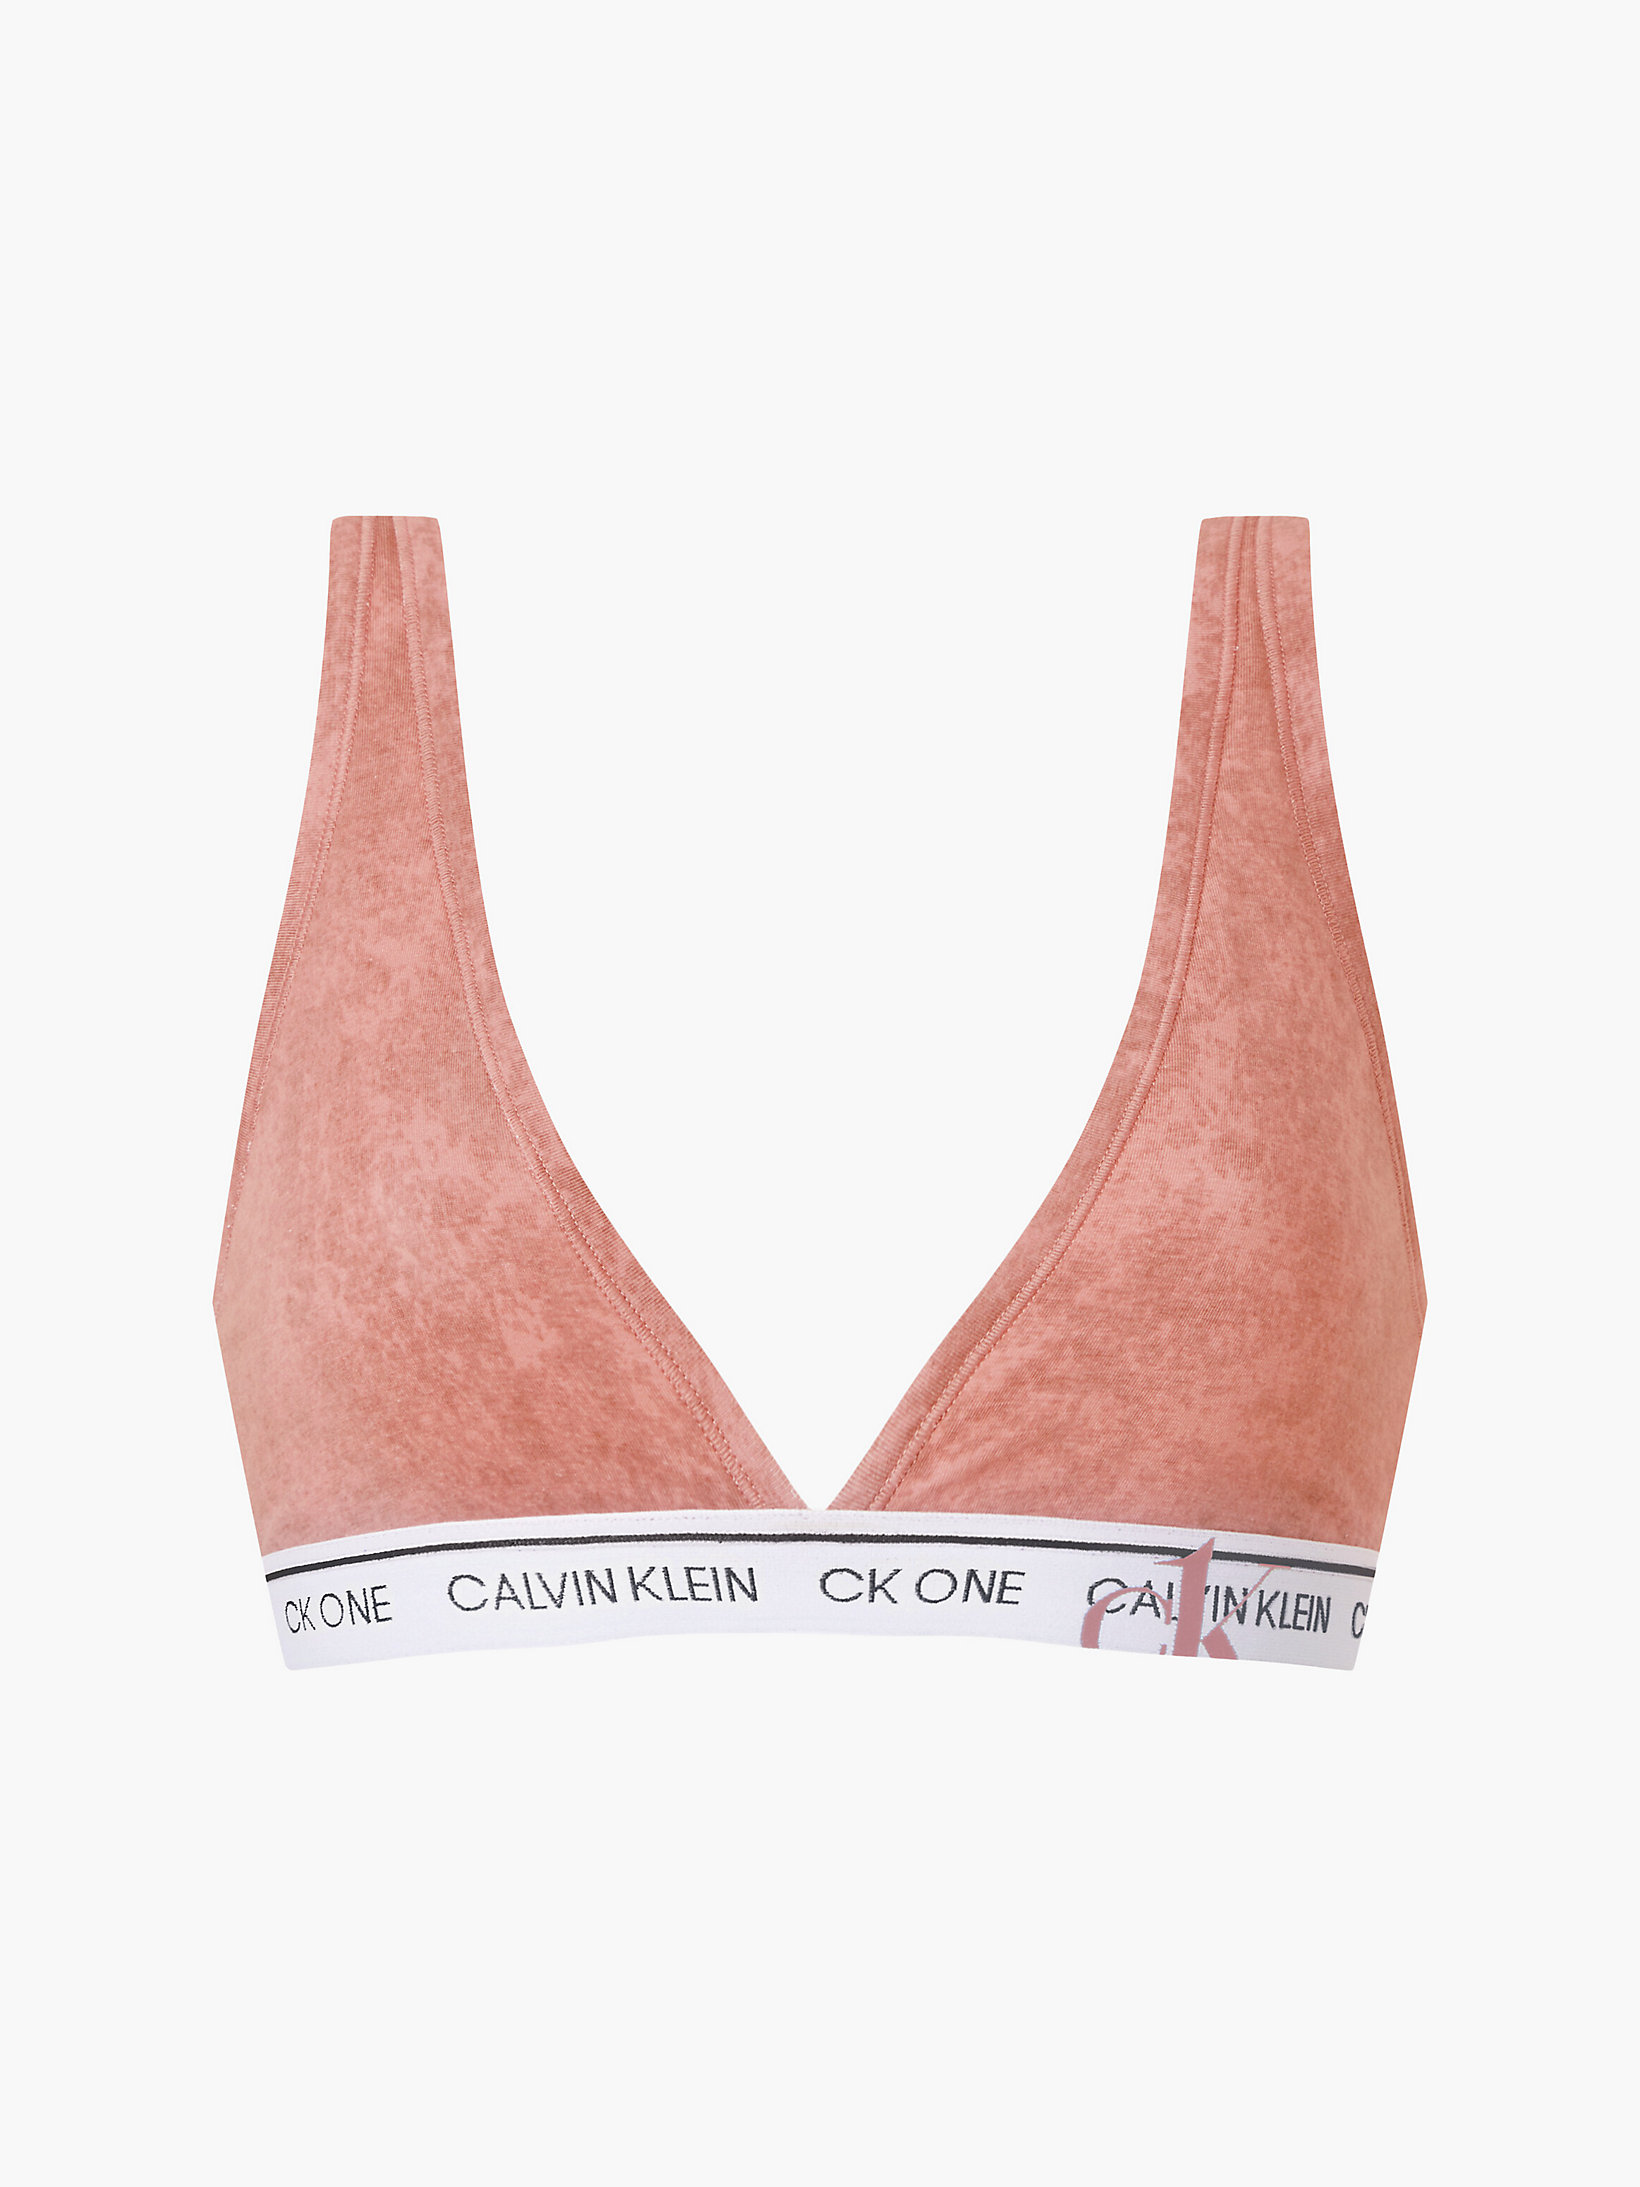 Soutien-Gorge Triangle - CK One > Faded Red Grape > undefined femmes > Calvin Klein